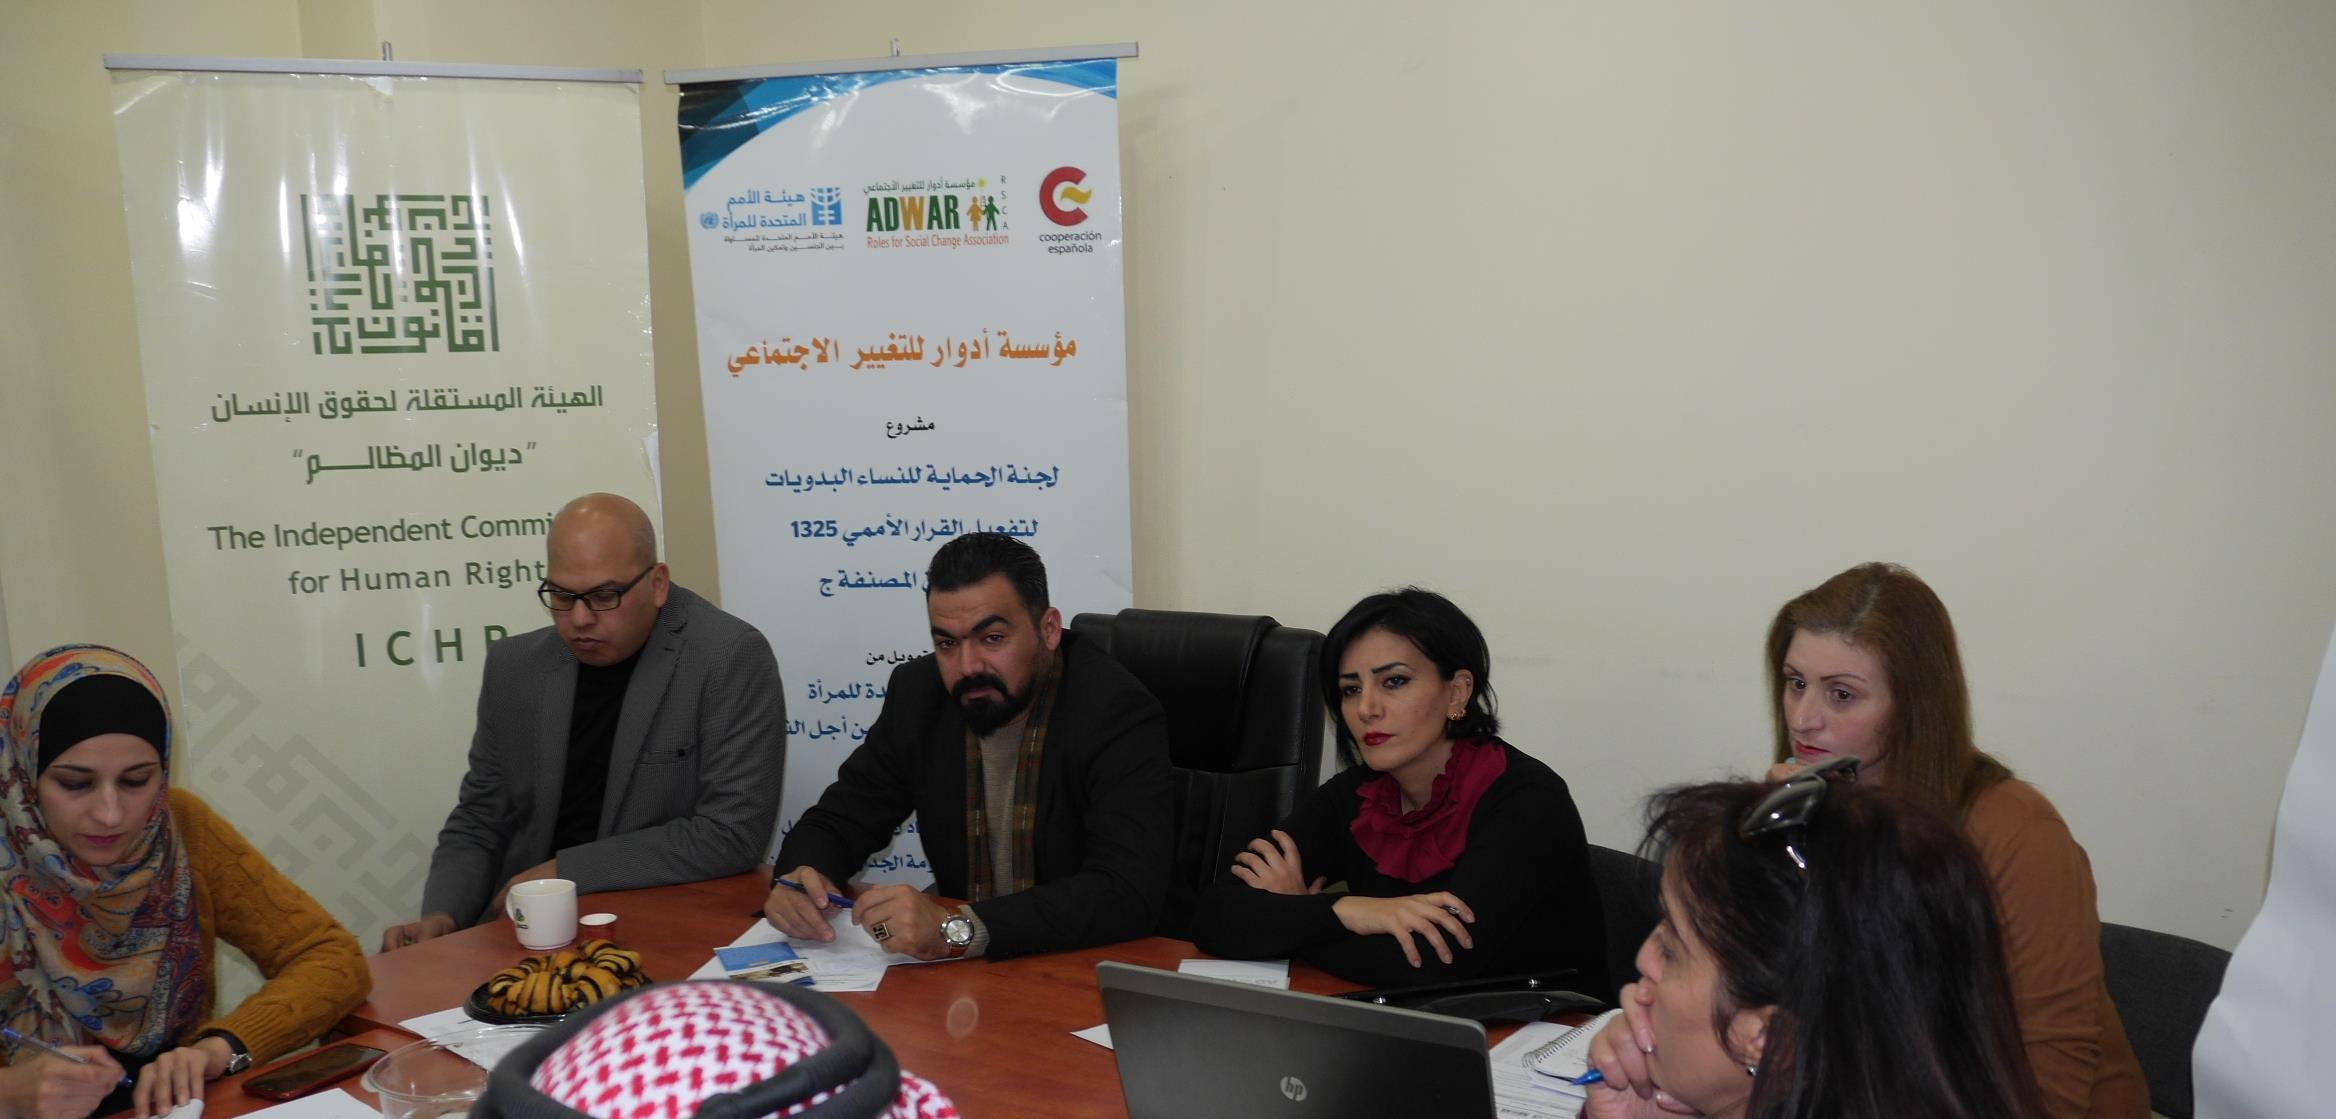  ADWAR in partnership with the Independent Commission for Human Rights held a seminar in honor of the international week for the elimination of violence against Women within the project (protection Commission for Bedouin women to activate the UN resolution 1325 in C areas)